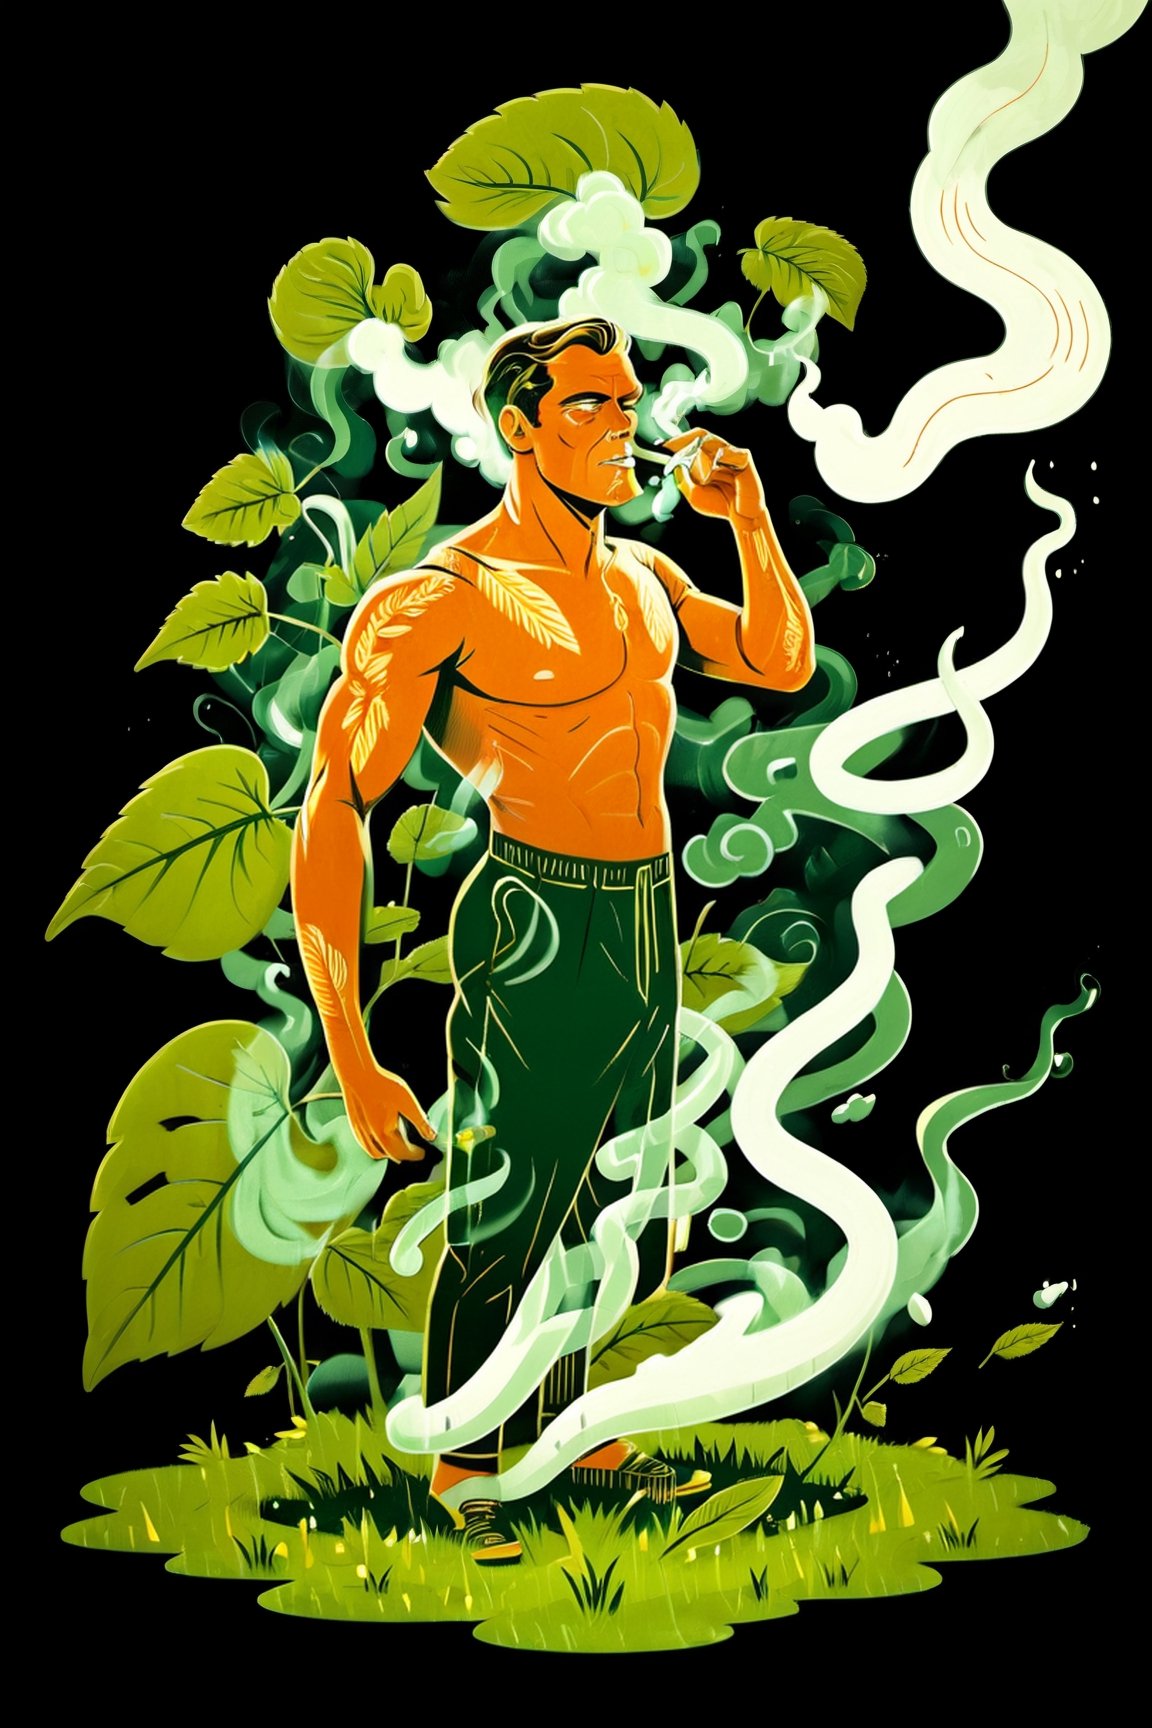 Illustration in the style of Cleon Peterson, The god of grass,male, smoking, lots of leaves, smoke, floating in the air, wuld garden illustrations, two color lineart, thick lines, calygraphy, dark orange and gold, dark green, style of Hsiao Ron Cheng 